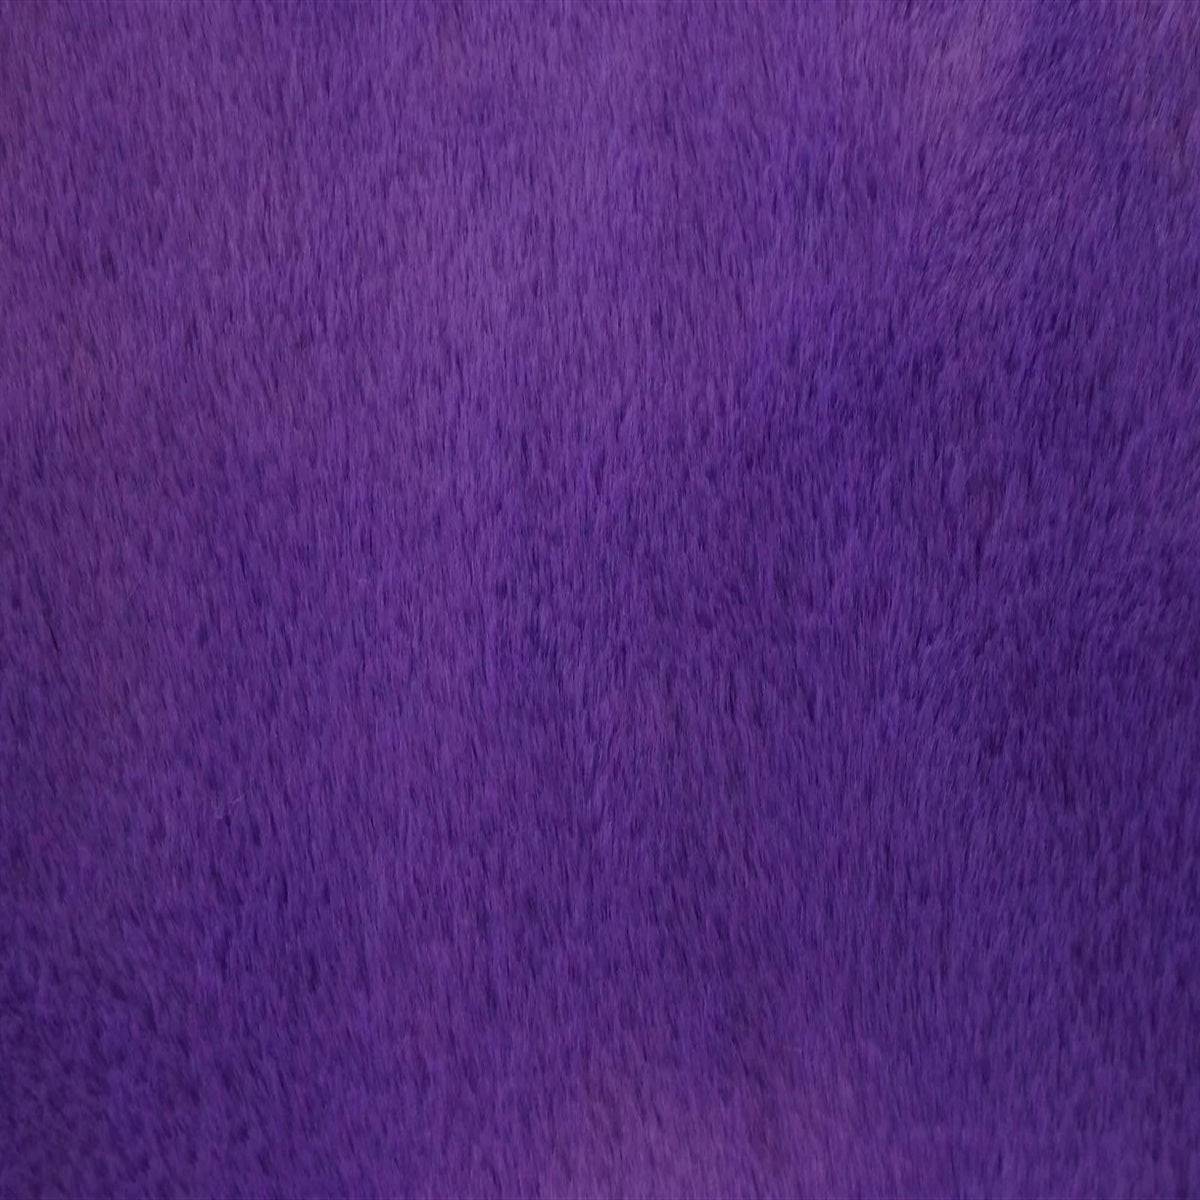 Wholesale Fabric By The Roll Bunny Thick Minky Fabric 20 YardsICE FABRICSICE FABRICSPurpleBy The Roll (60" Wide)Wholesale Fabric By The Roll Bunny Thick Minky Fabric 20 Yards ICE FABRICS